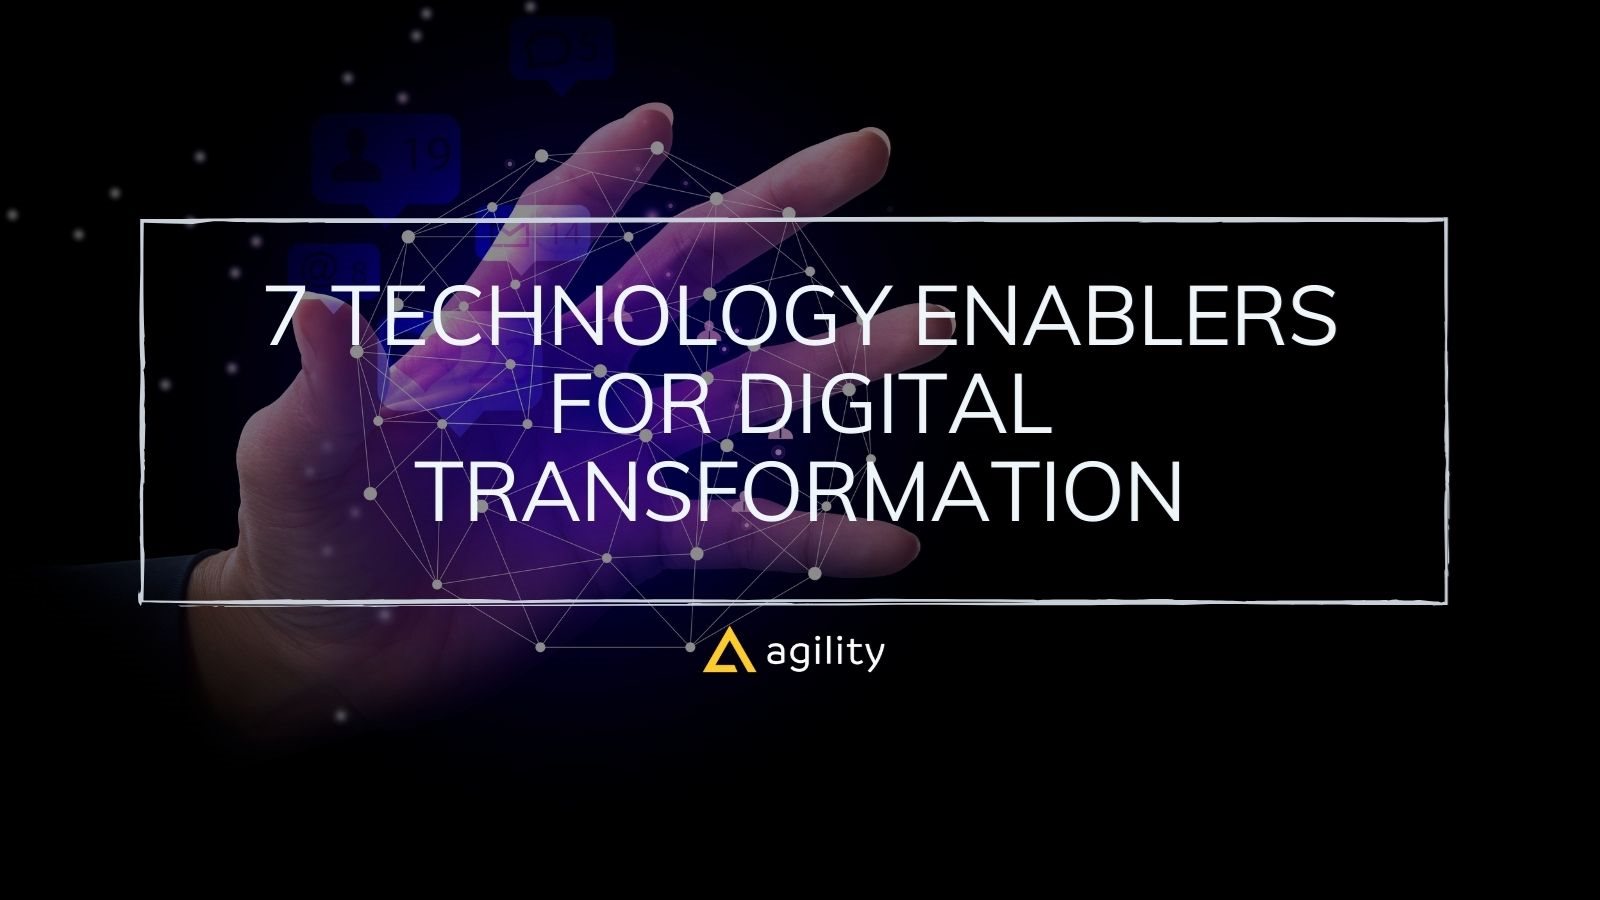 7 Technology Enablers for Digital Transformation